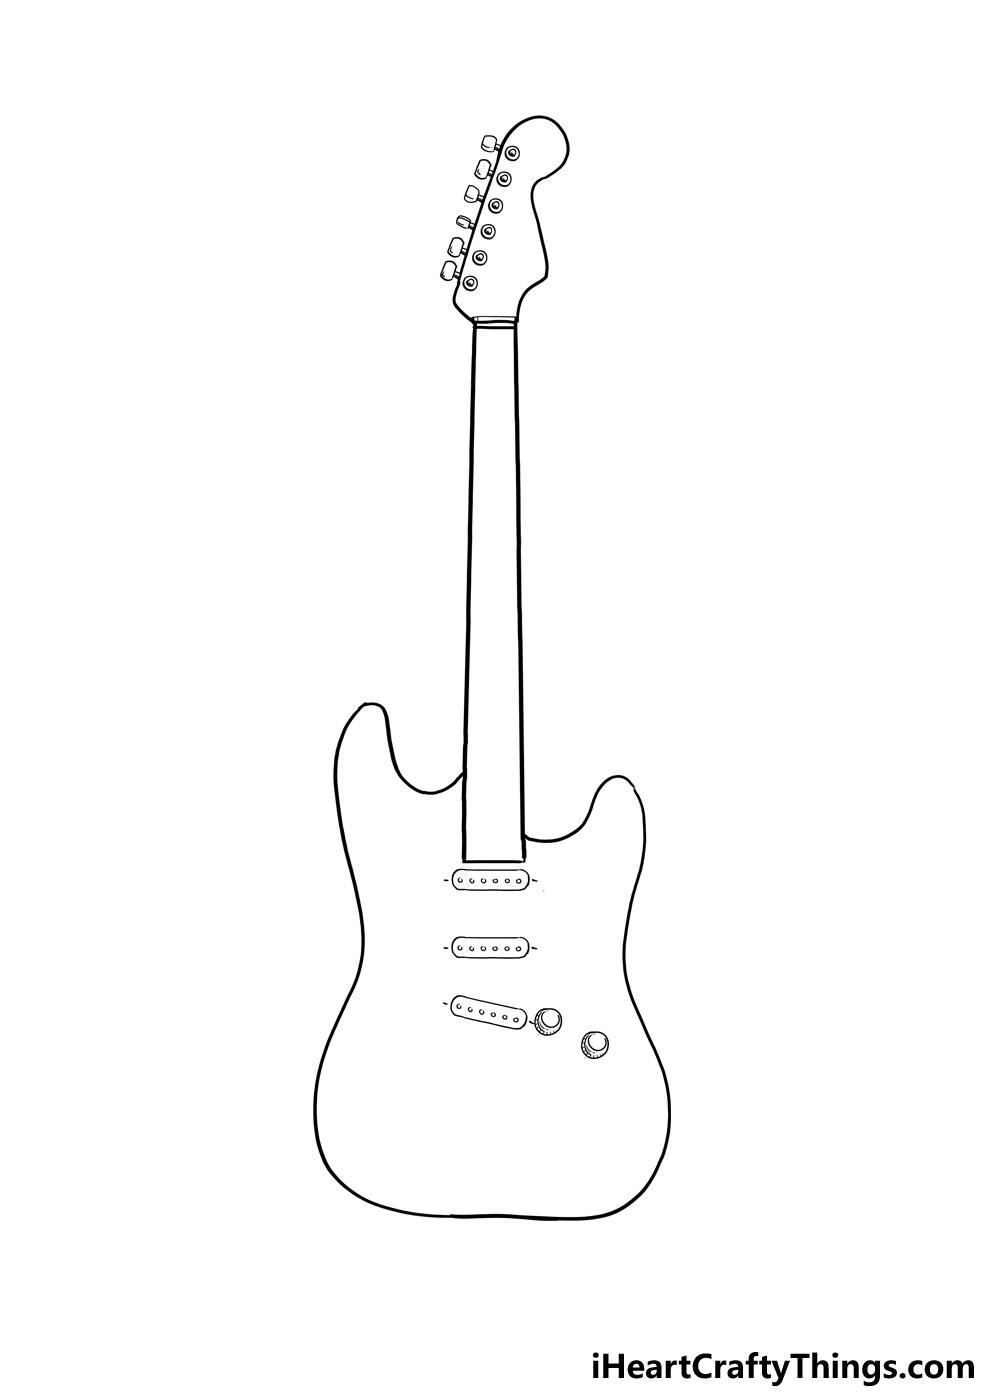 How to Draw An Electric Guitar step 3